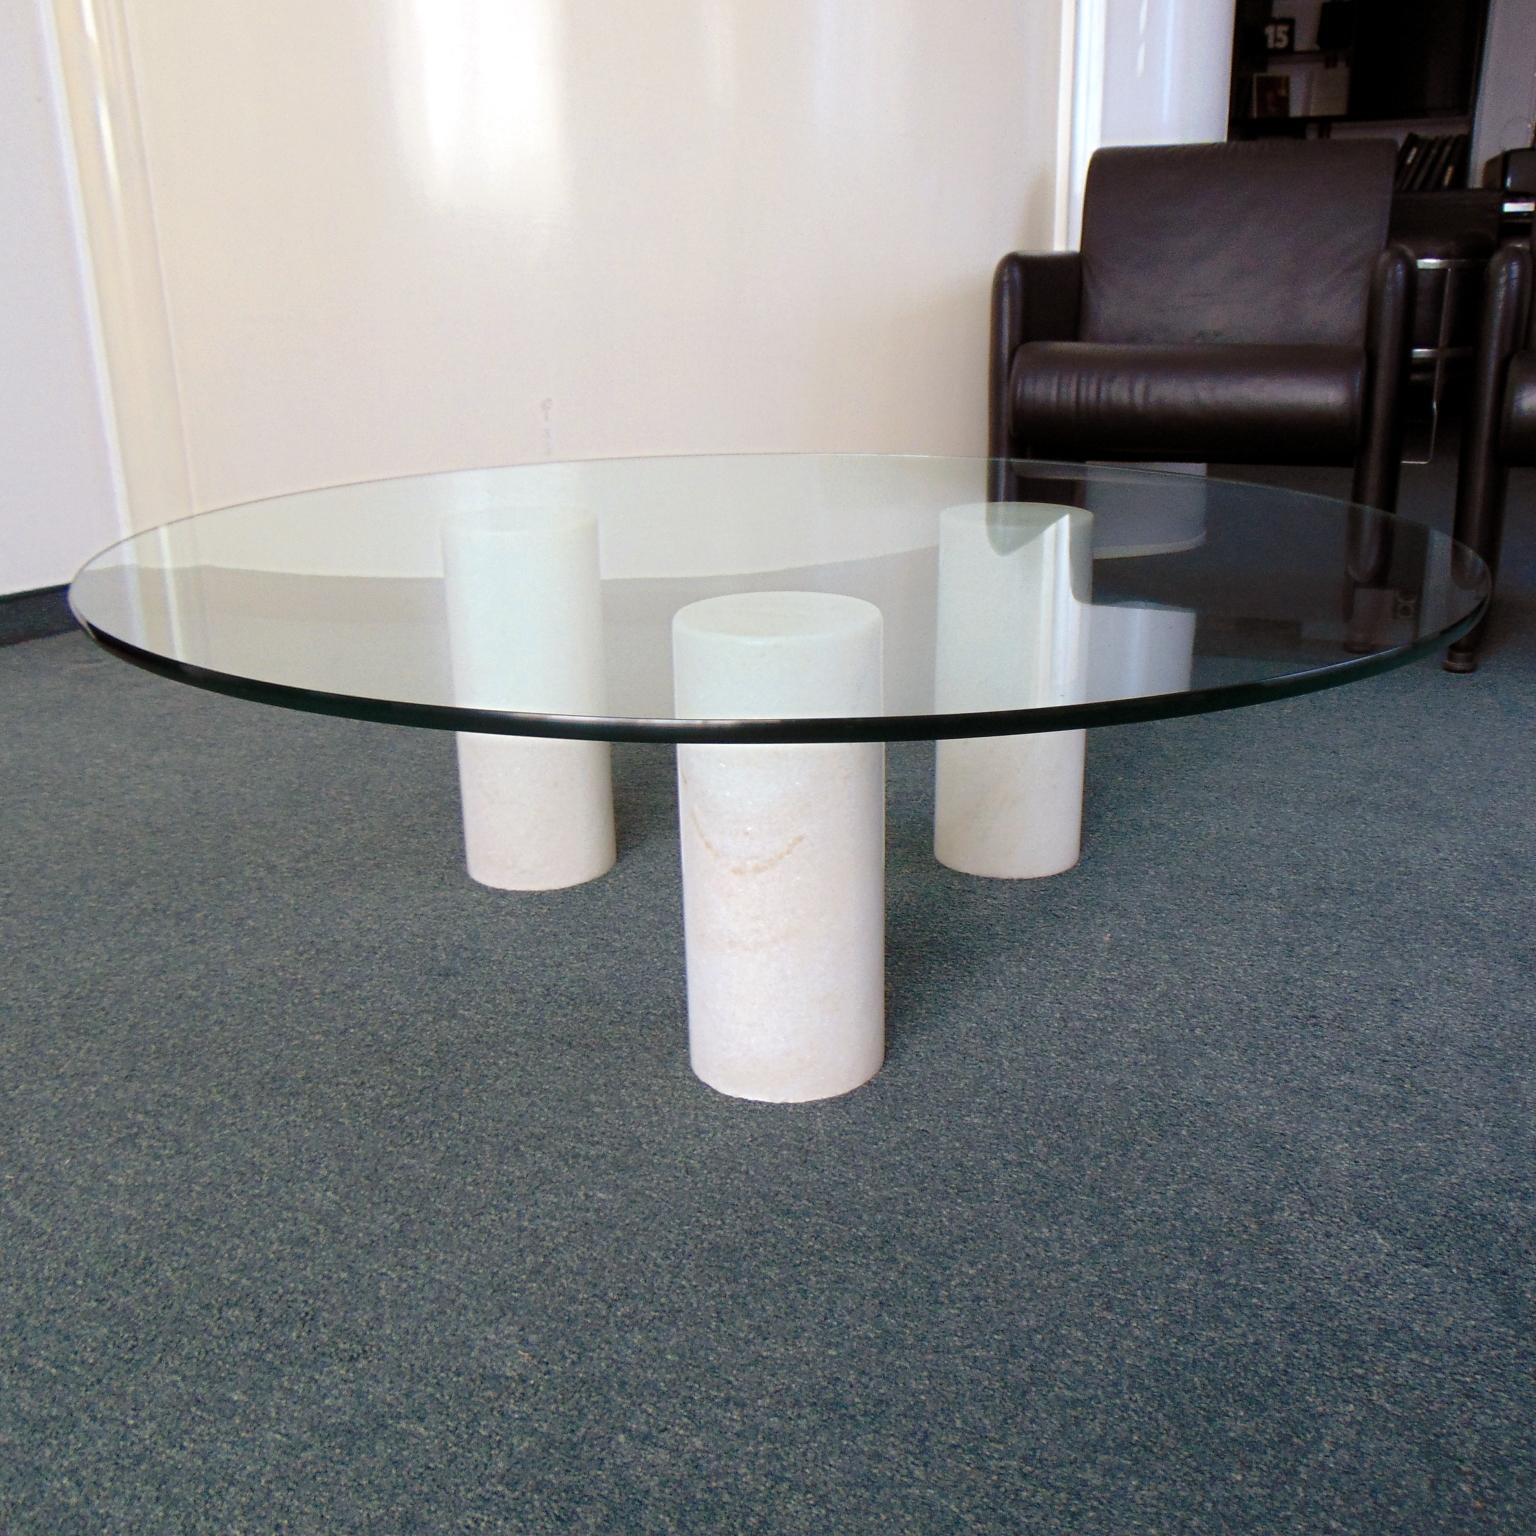 Polished 1980s Coffee Table, Italian White Marble Cylindric Legs and Glass Top For Sale